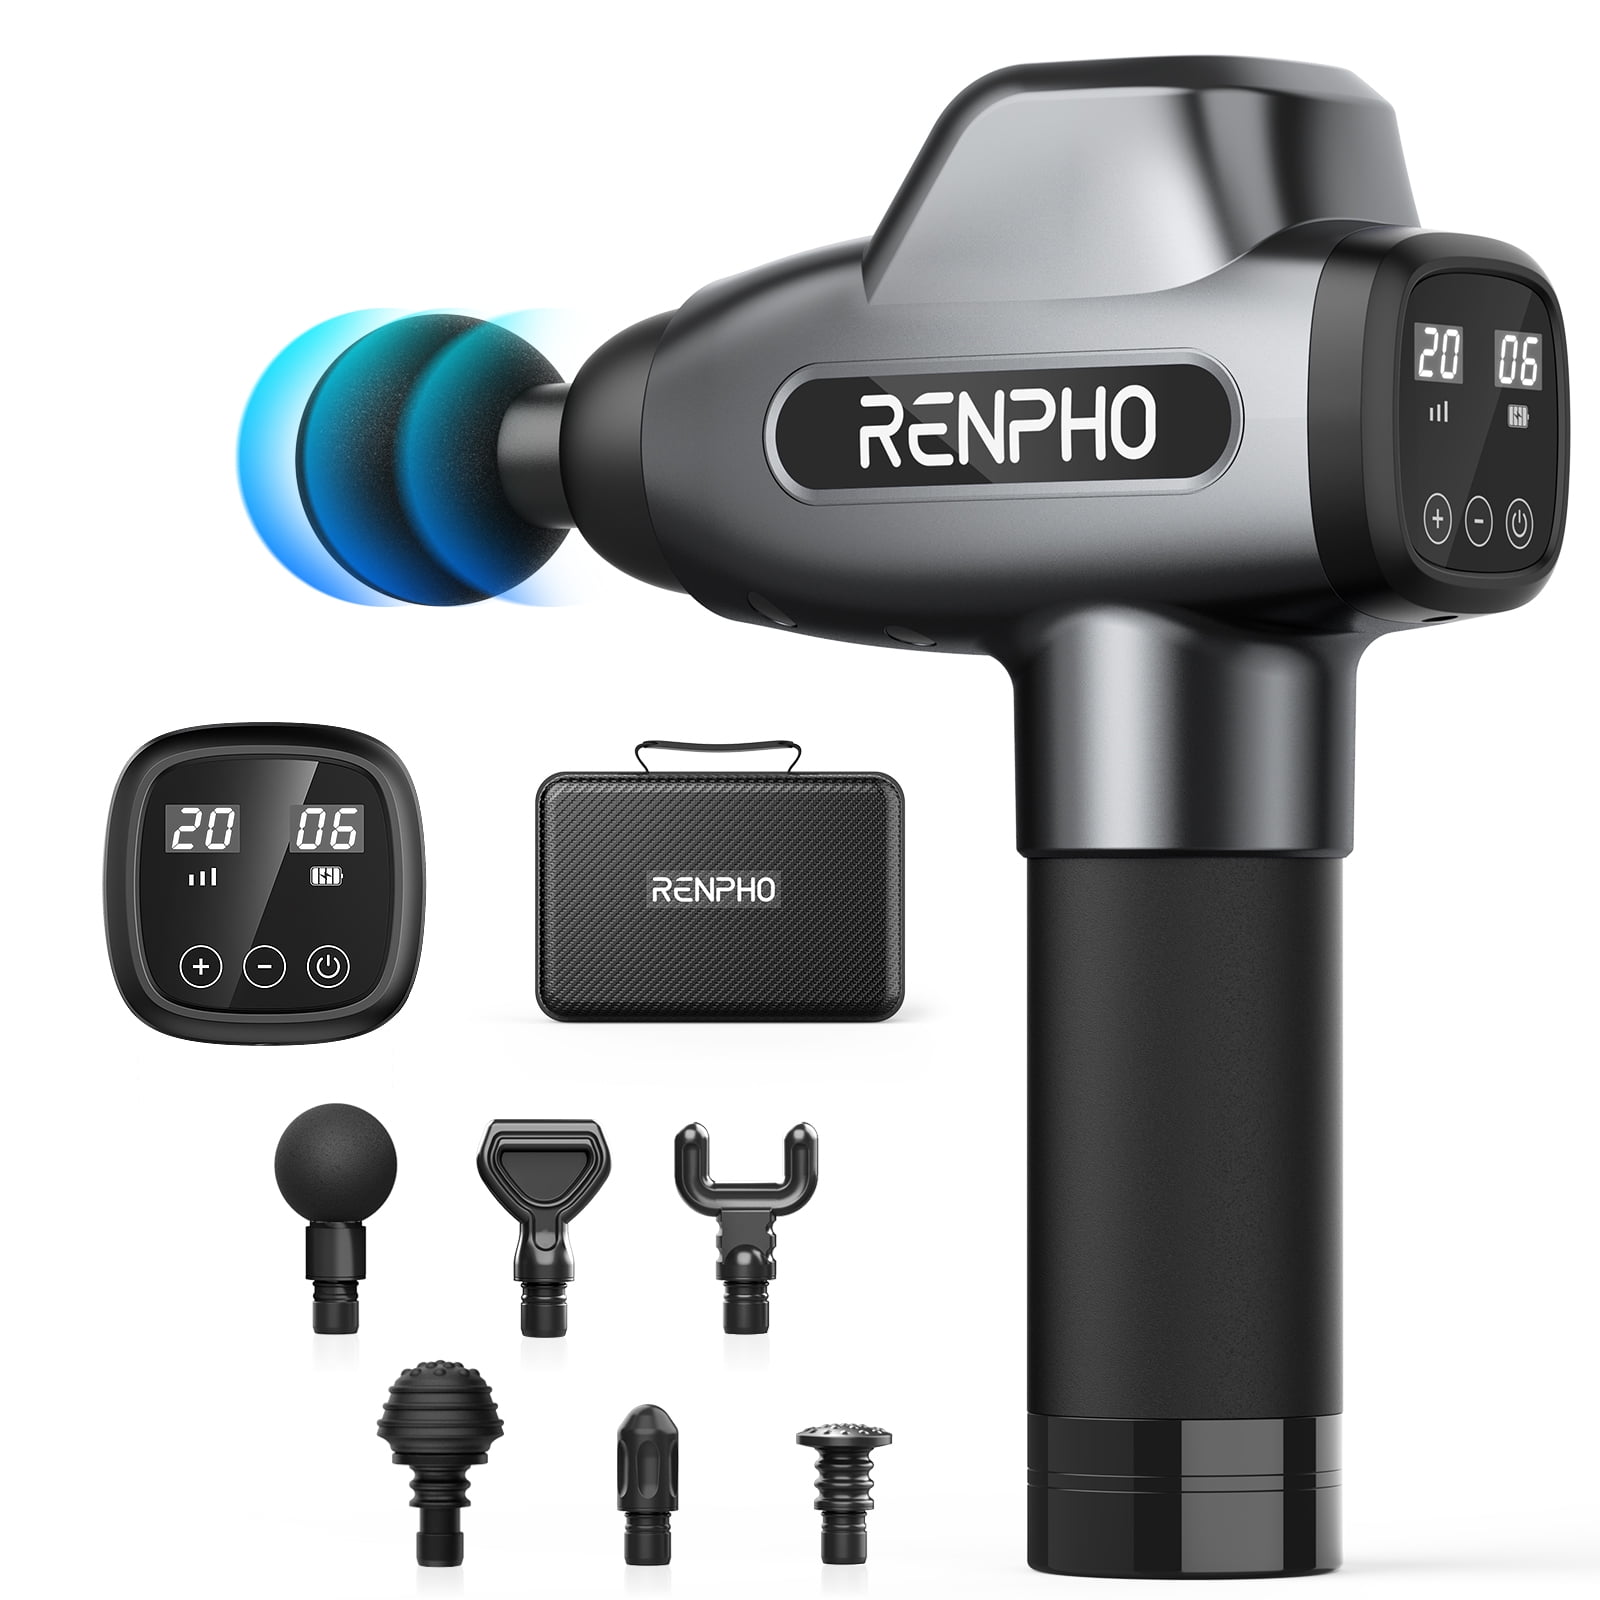 Renpho Muscle Massage Gun for Athletes Pain Relief